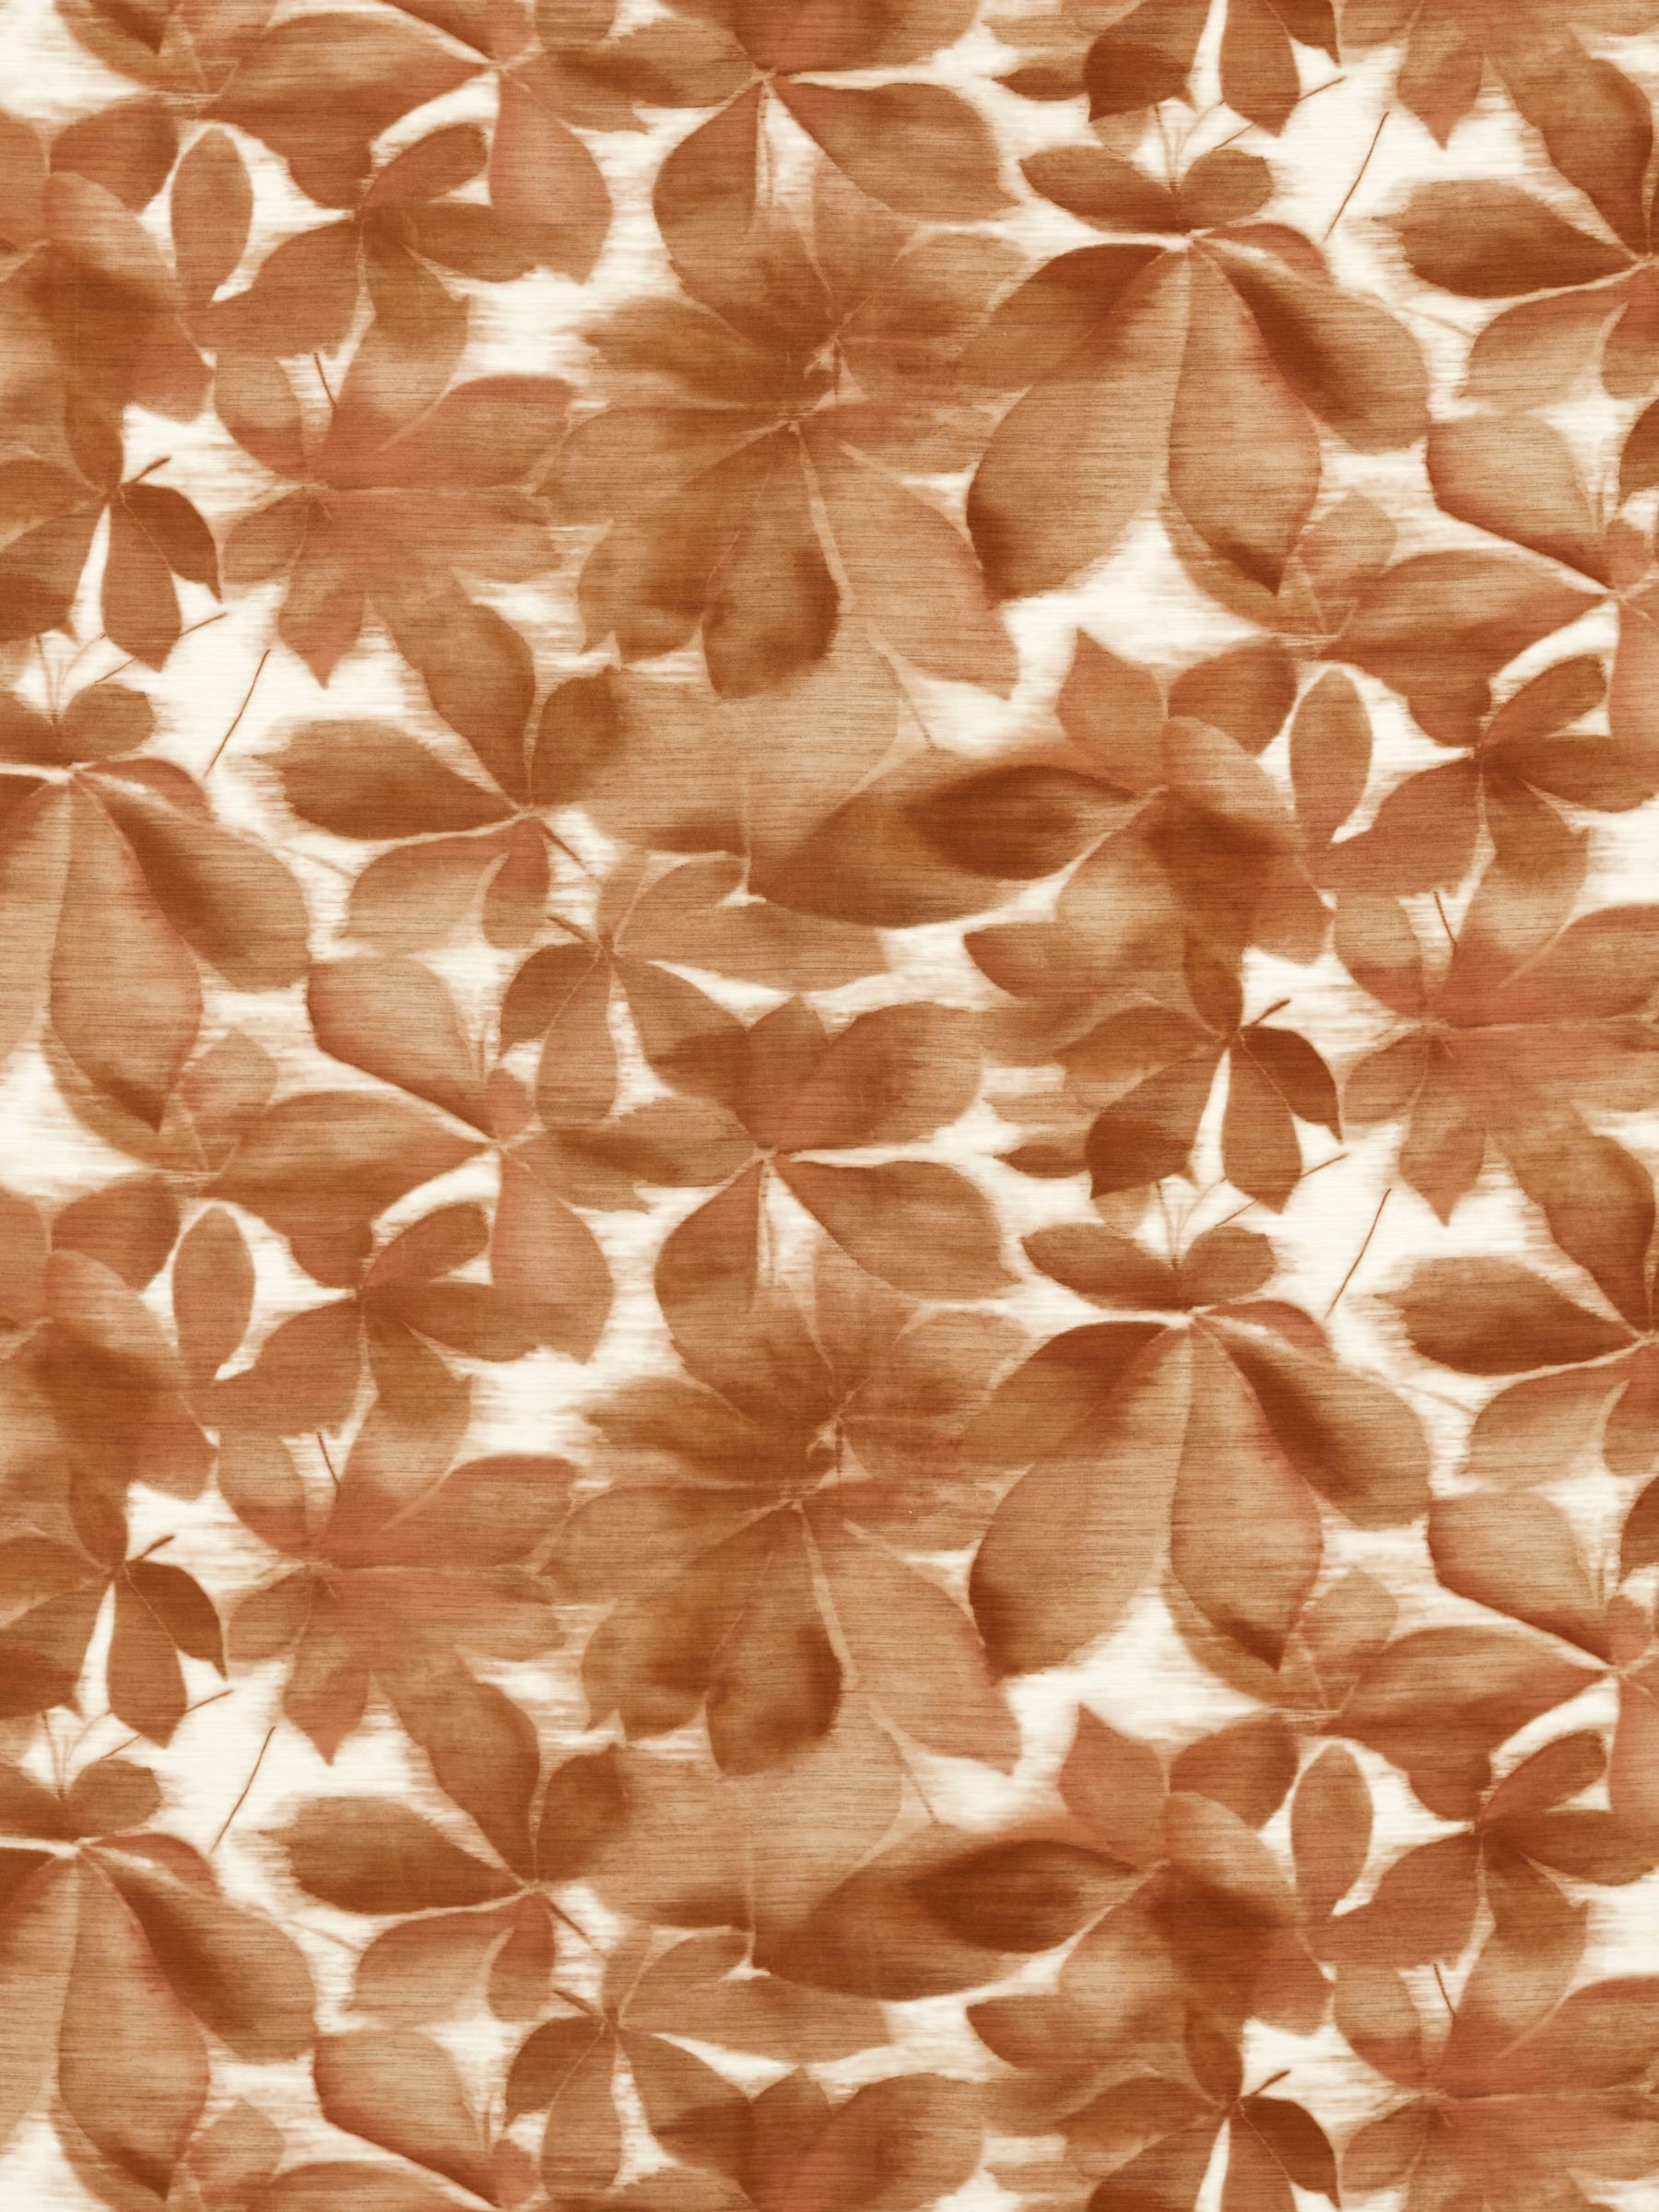 Harlequin Grounded Furnishing Fabric, Baked Terracotta/Parchment